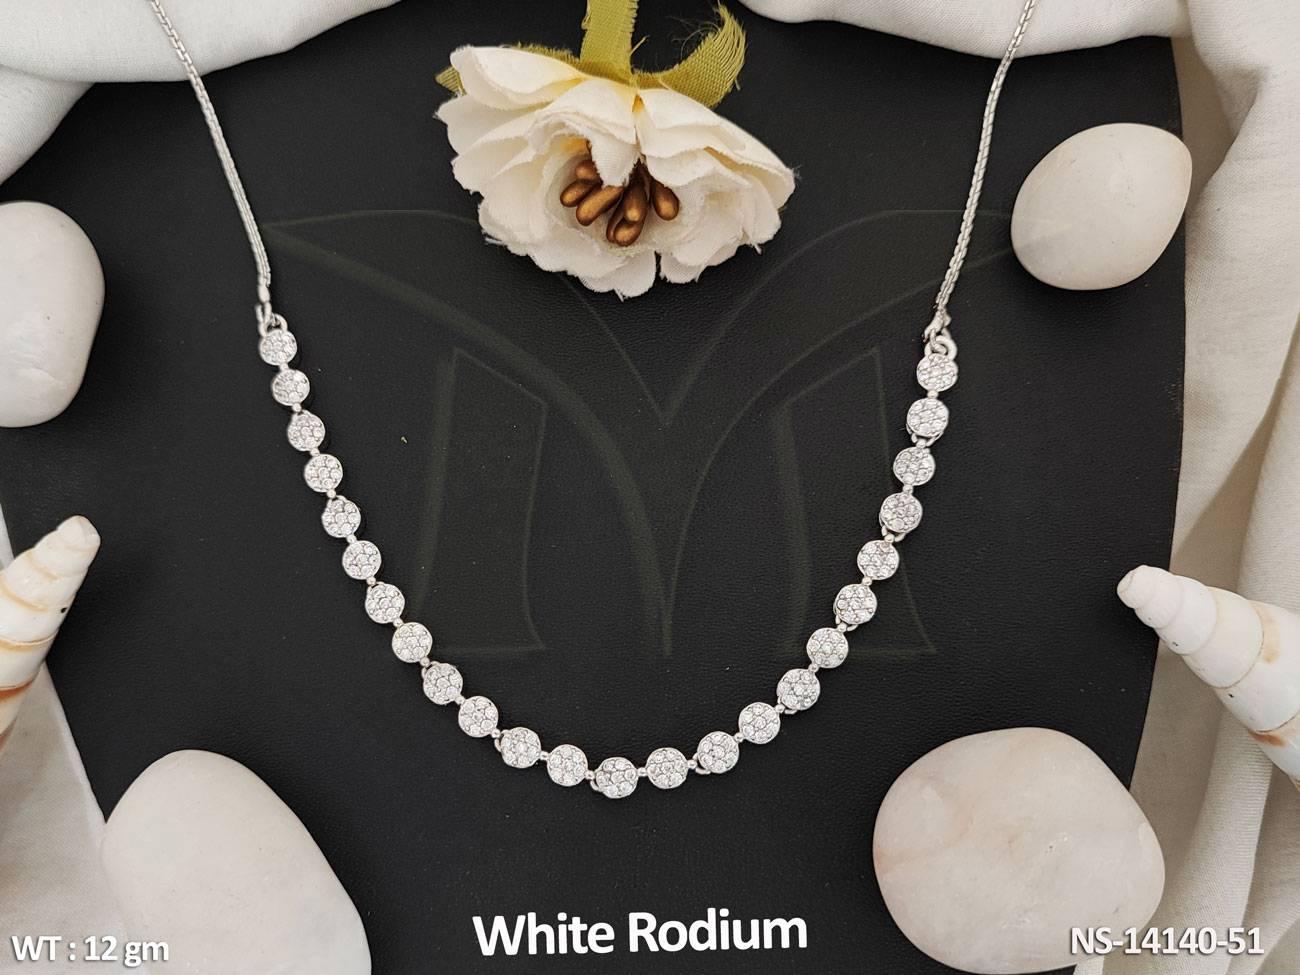 Expertly crafted with white rhodium polish, this short necklace set boasts a fancy style adorned with sparkling AD stones.